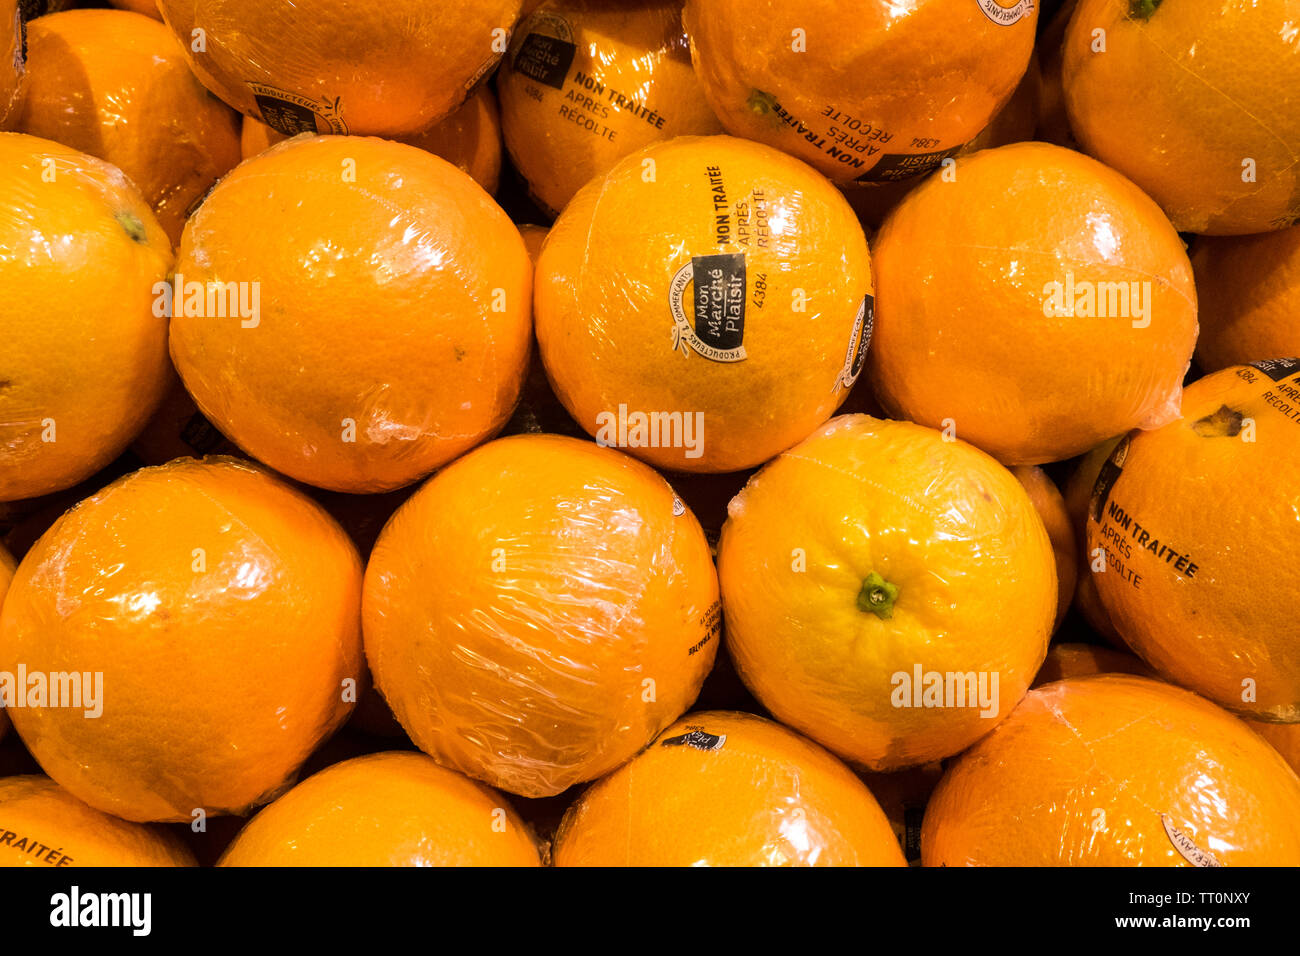 Individual,individually,plastic,wrapped,oranges,shipped,from,Portugal,and,for,sale,in,supermarket,Aude,province,south,of,France,French,Europe,European Stock Photo